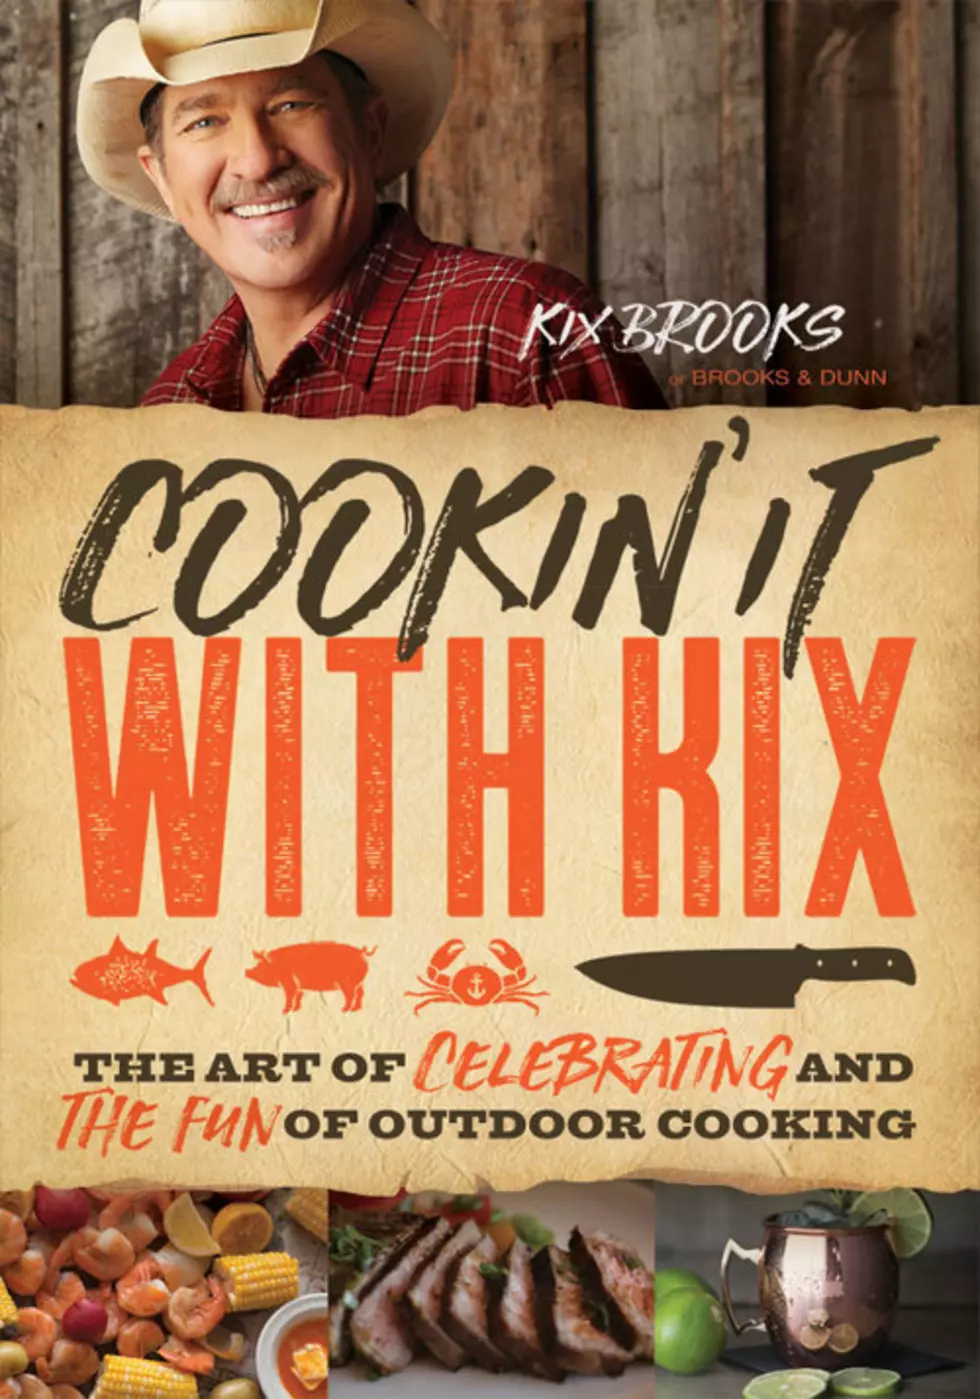 Now You Can Use Kix Brooks Cookbook While Listening To Brooks And Dunn